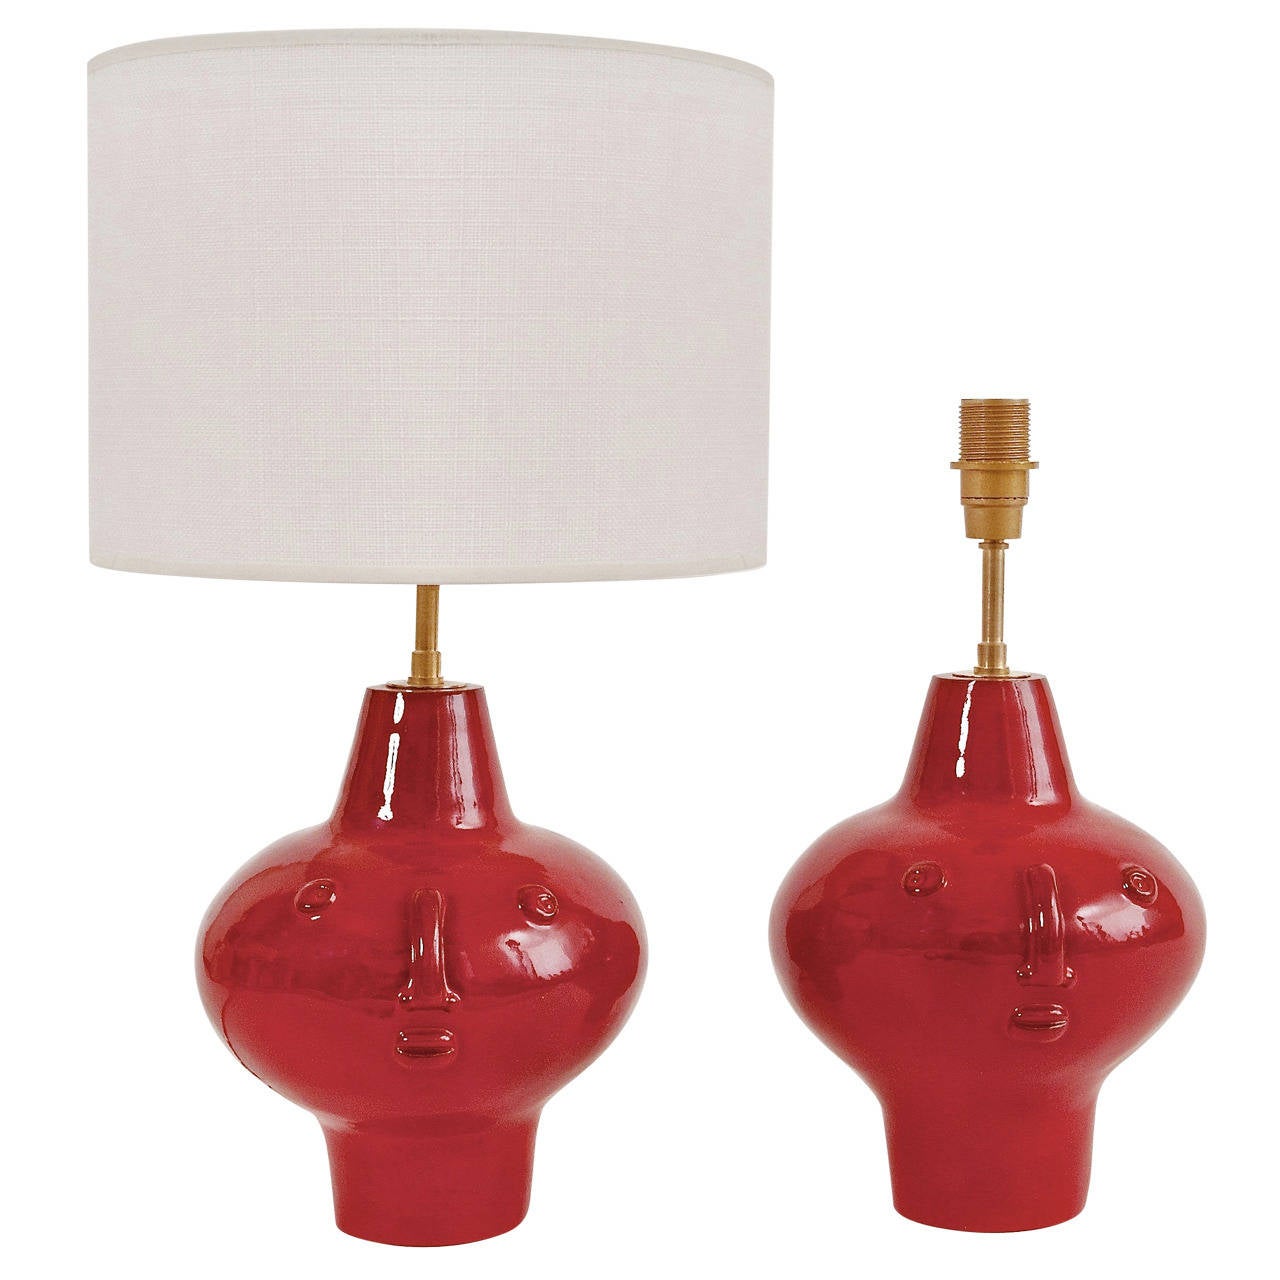 Pair of Red Ceramic Biomorphic Lamp Bases Signed by DaLo For Sale